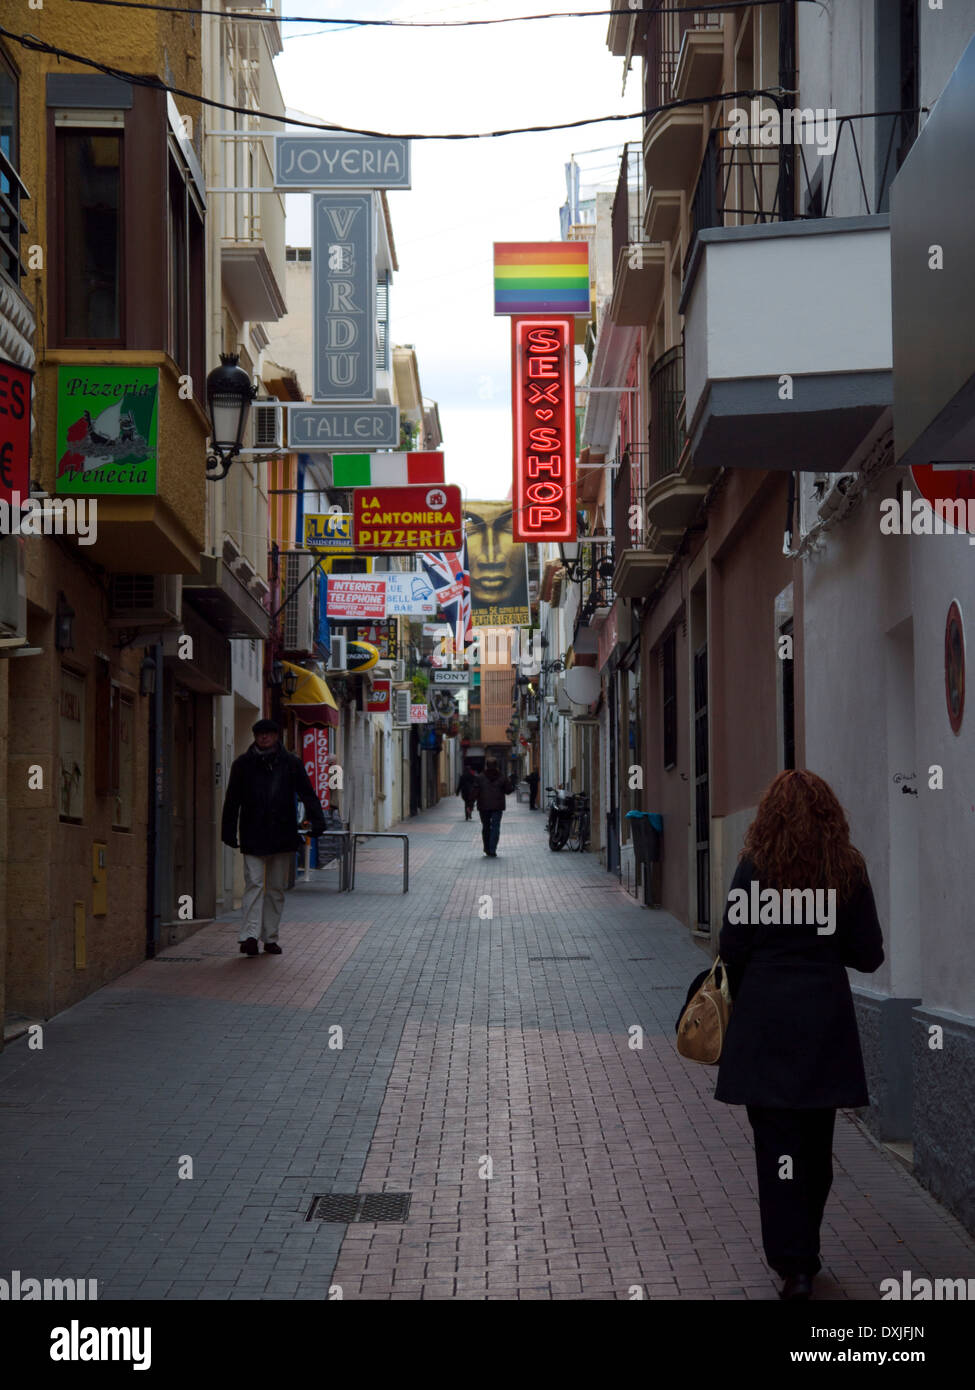 Typical shopping street in the old town part of Benidorm, Spain Stock Photo  - Alamy